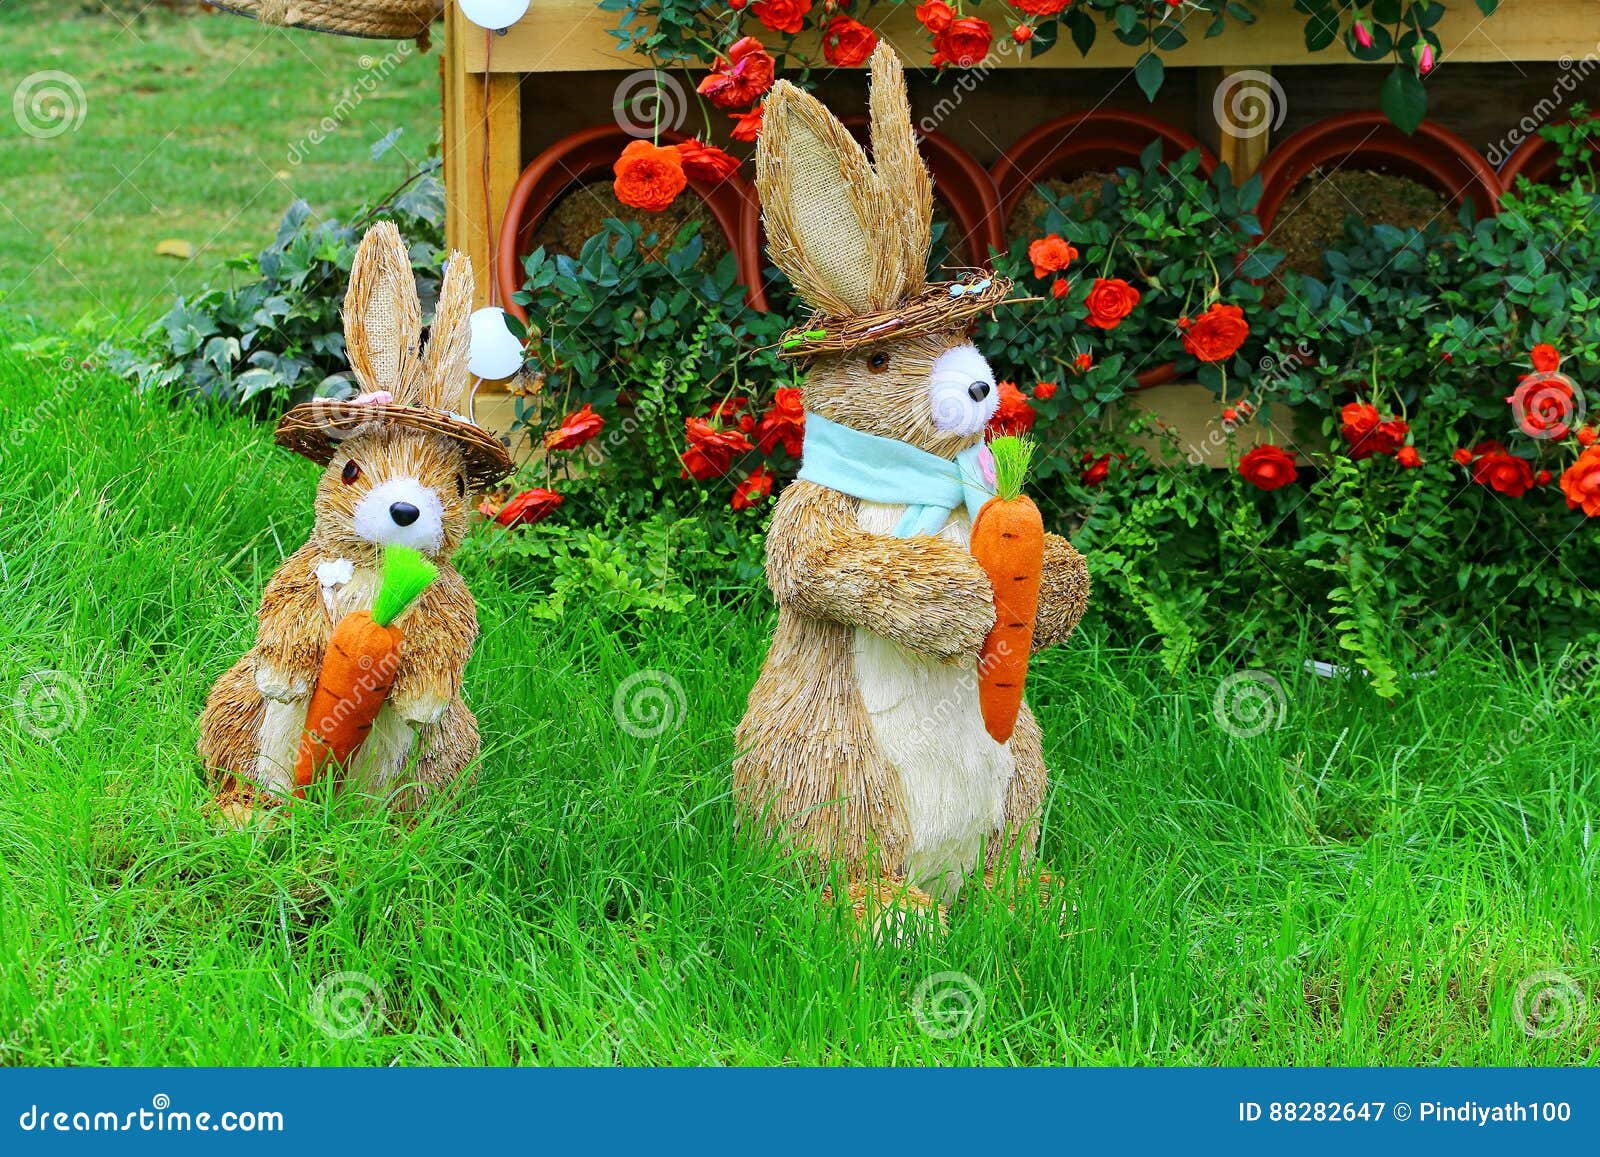 two cute little easter bunnies